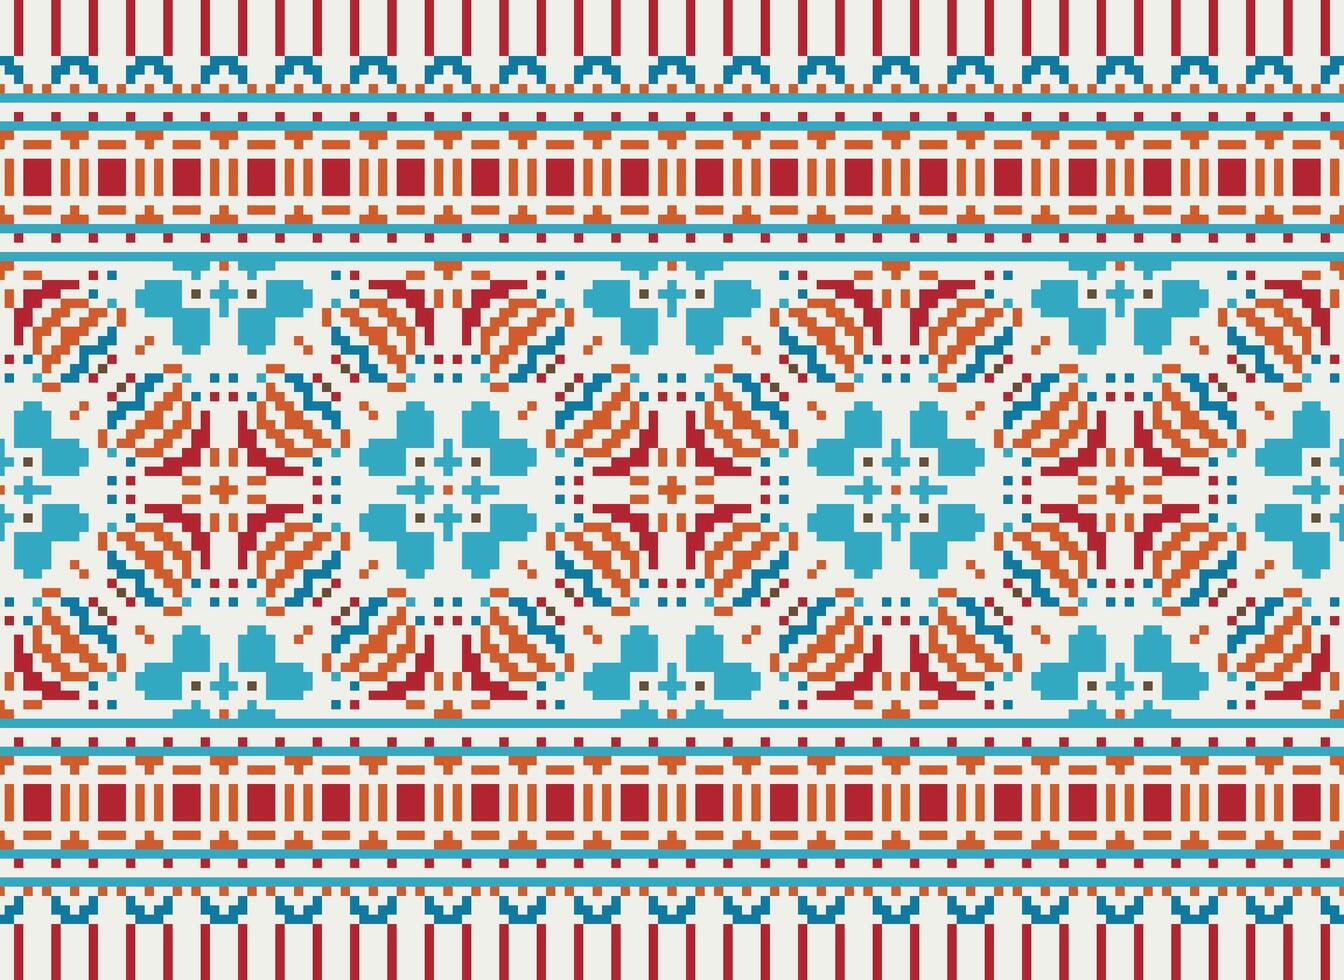 African cross stitch embroidery on background.geometric ethnic oriental seamless pattern traditional.Aztec style abstract vector illustration.design for texture,fabric,clothing,wrapping,carpet.